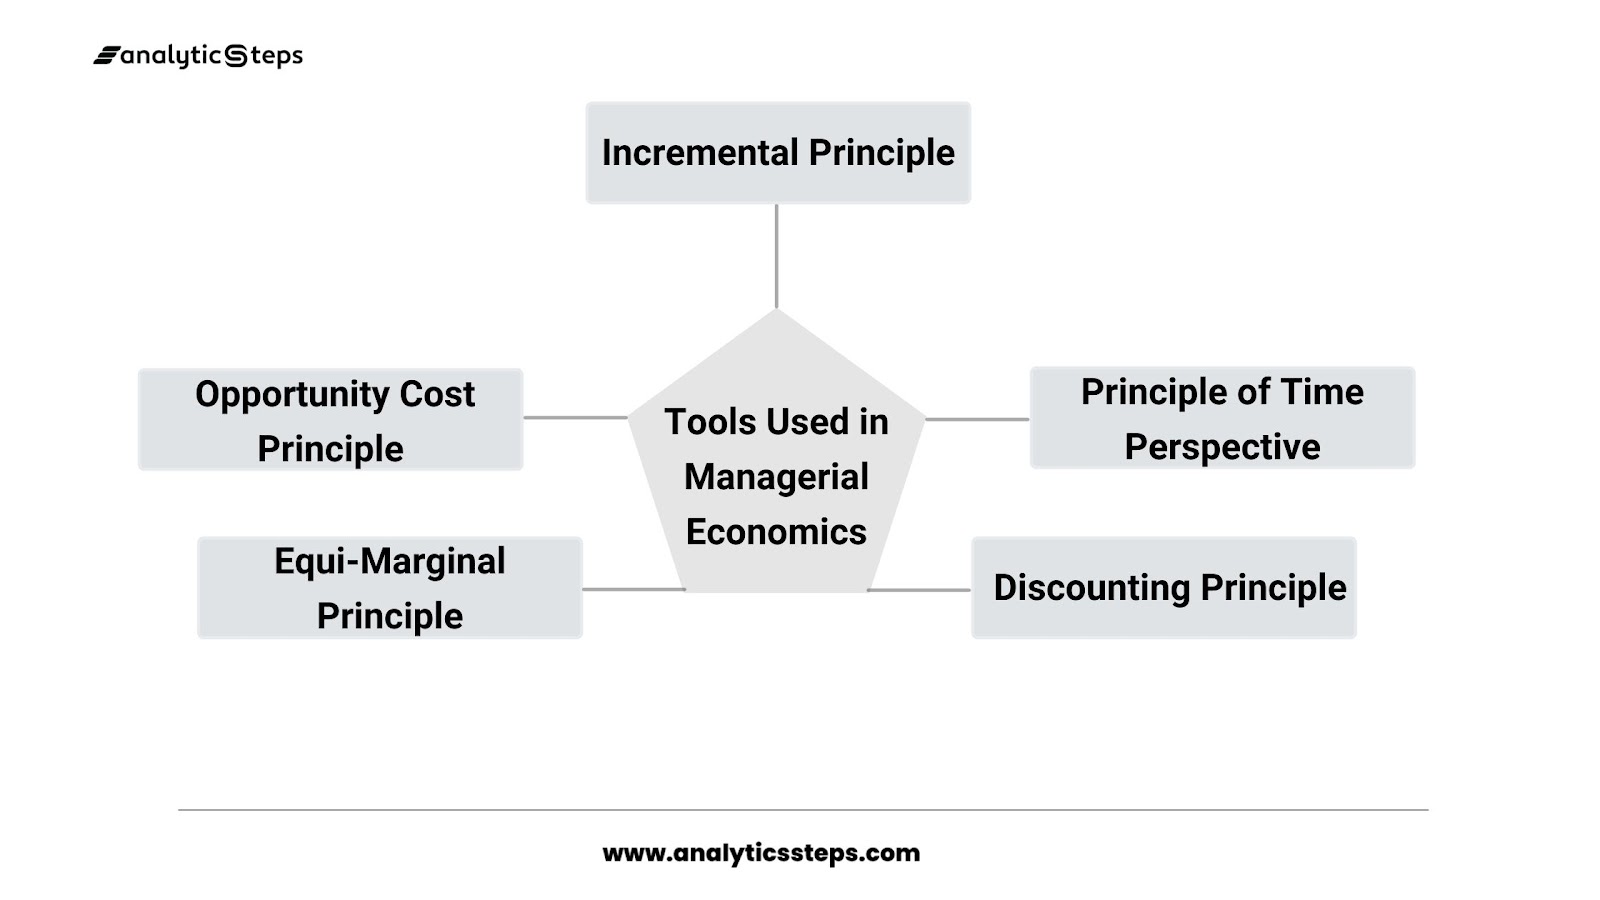 Managerial economics uses some economic tools that are opportunity cost principle, incremental principle, principle of time perspective, discounting principle, and Equi-marginal principle.